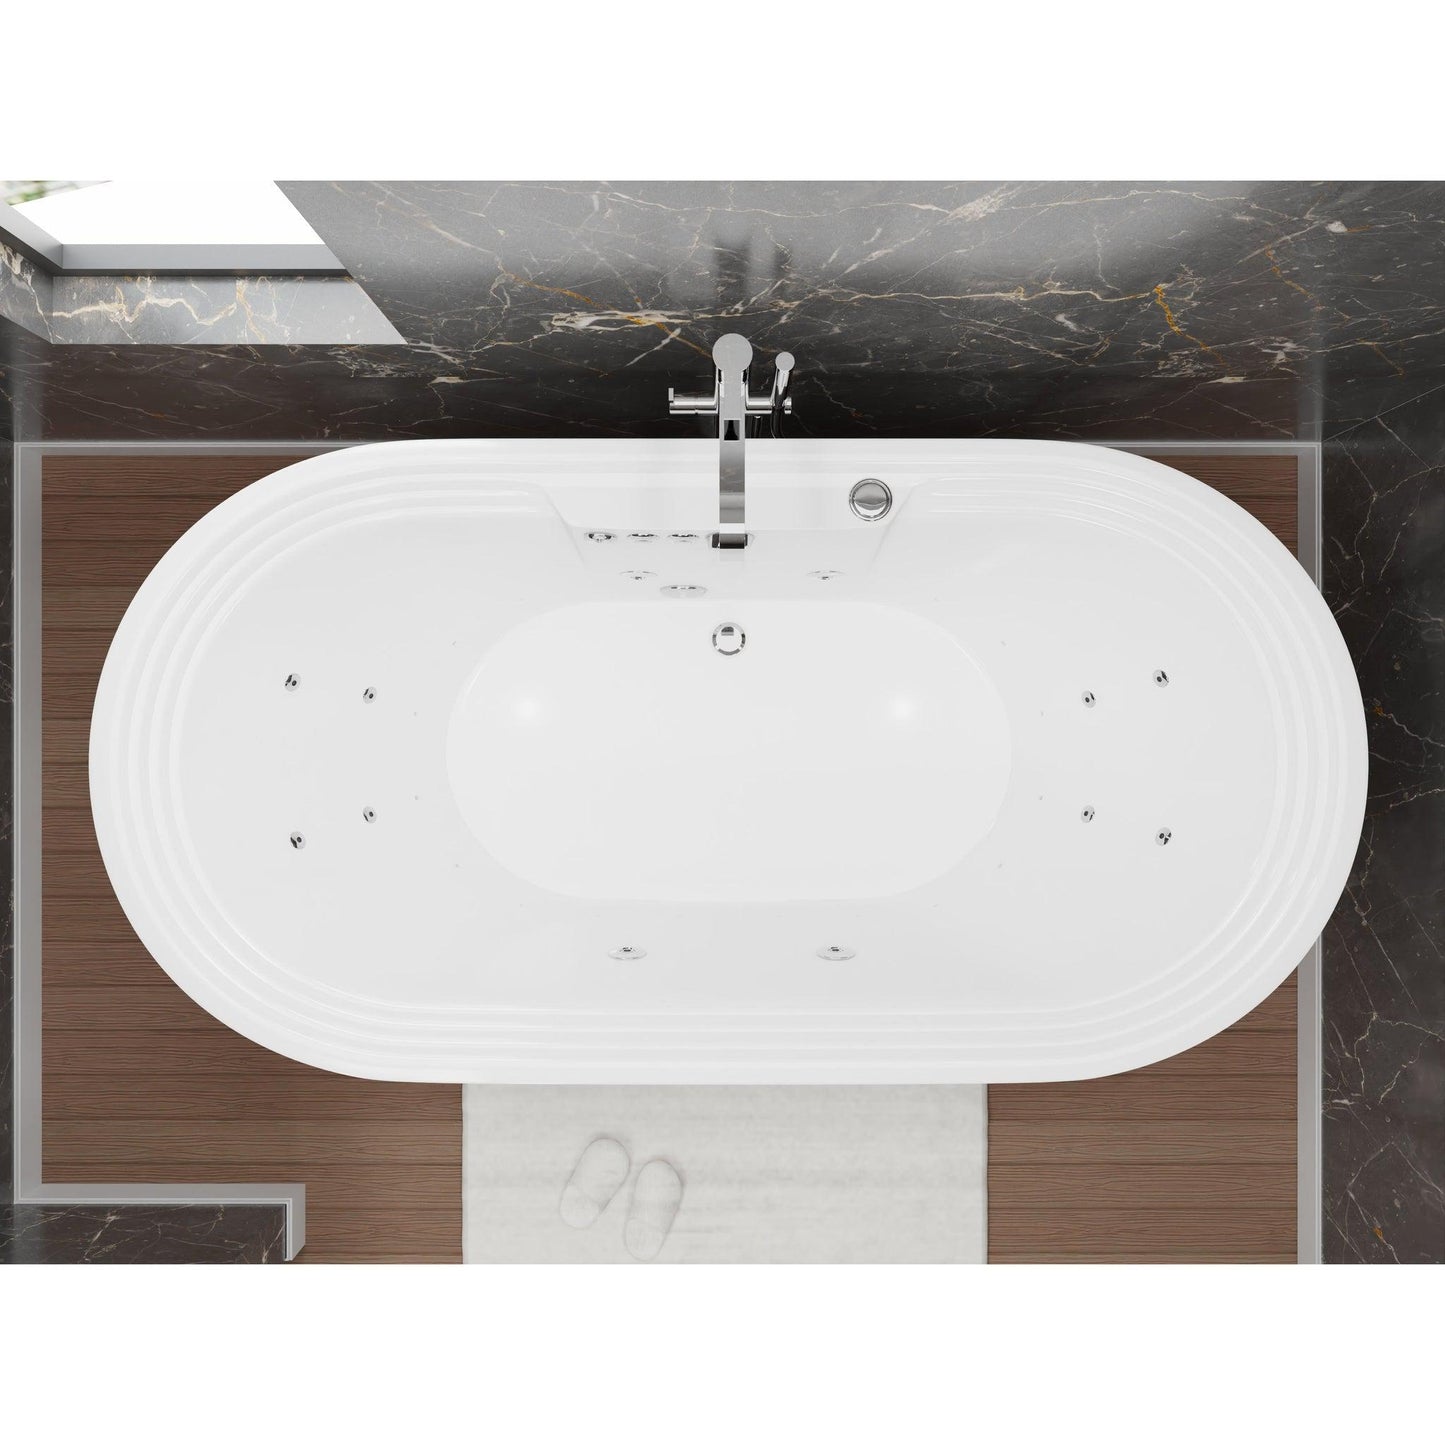 ANZZI Sofi Series 67" x 33" Matte White Freestanding Whirlpool Bathtub With Built-In Overflow and Pop-Up Drain